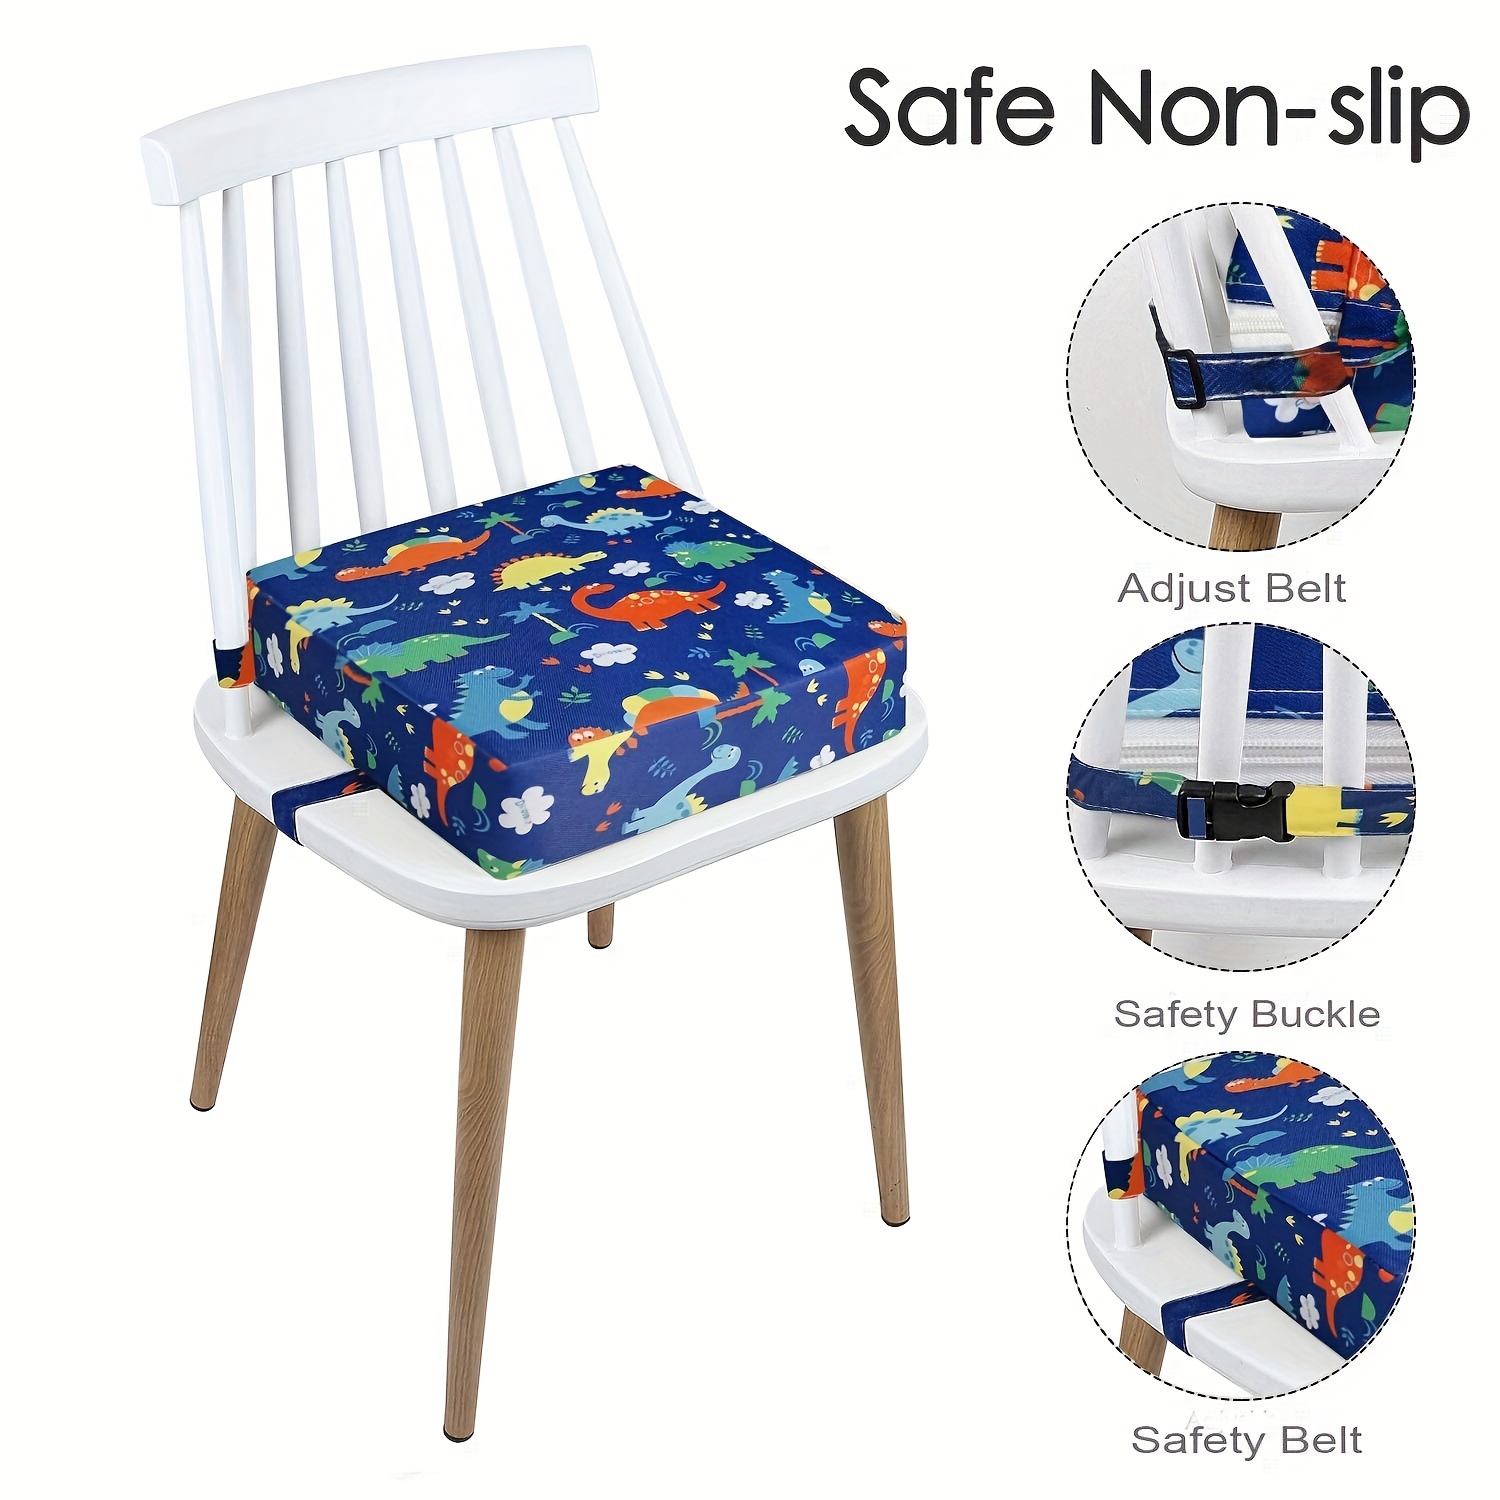 Booster Seat for Table Dining - Toddler PU Washable 2 Straps Safety Buckle  Kids Booster Seat for Dining Table, Portable Travel Increasing Cushion